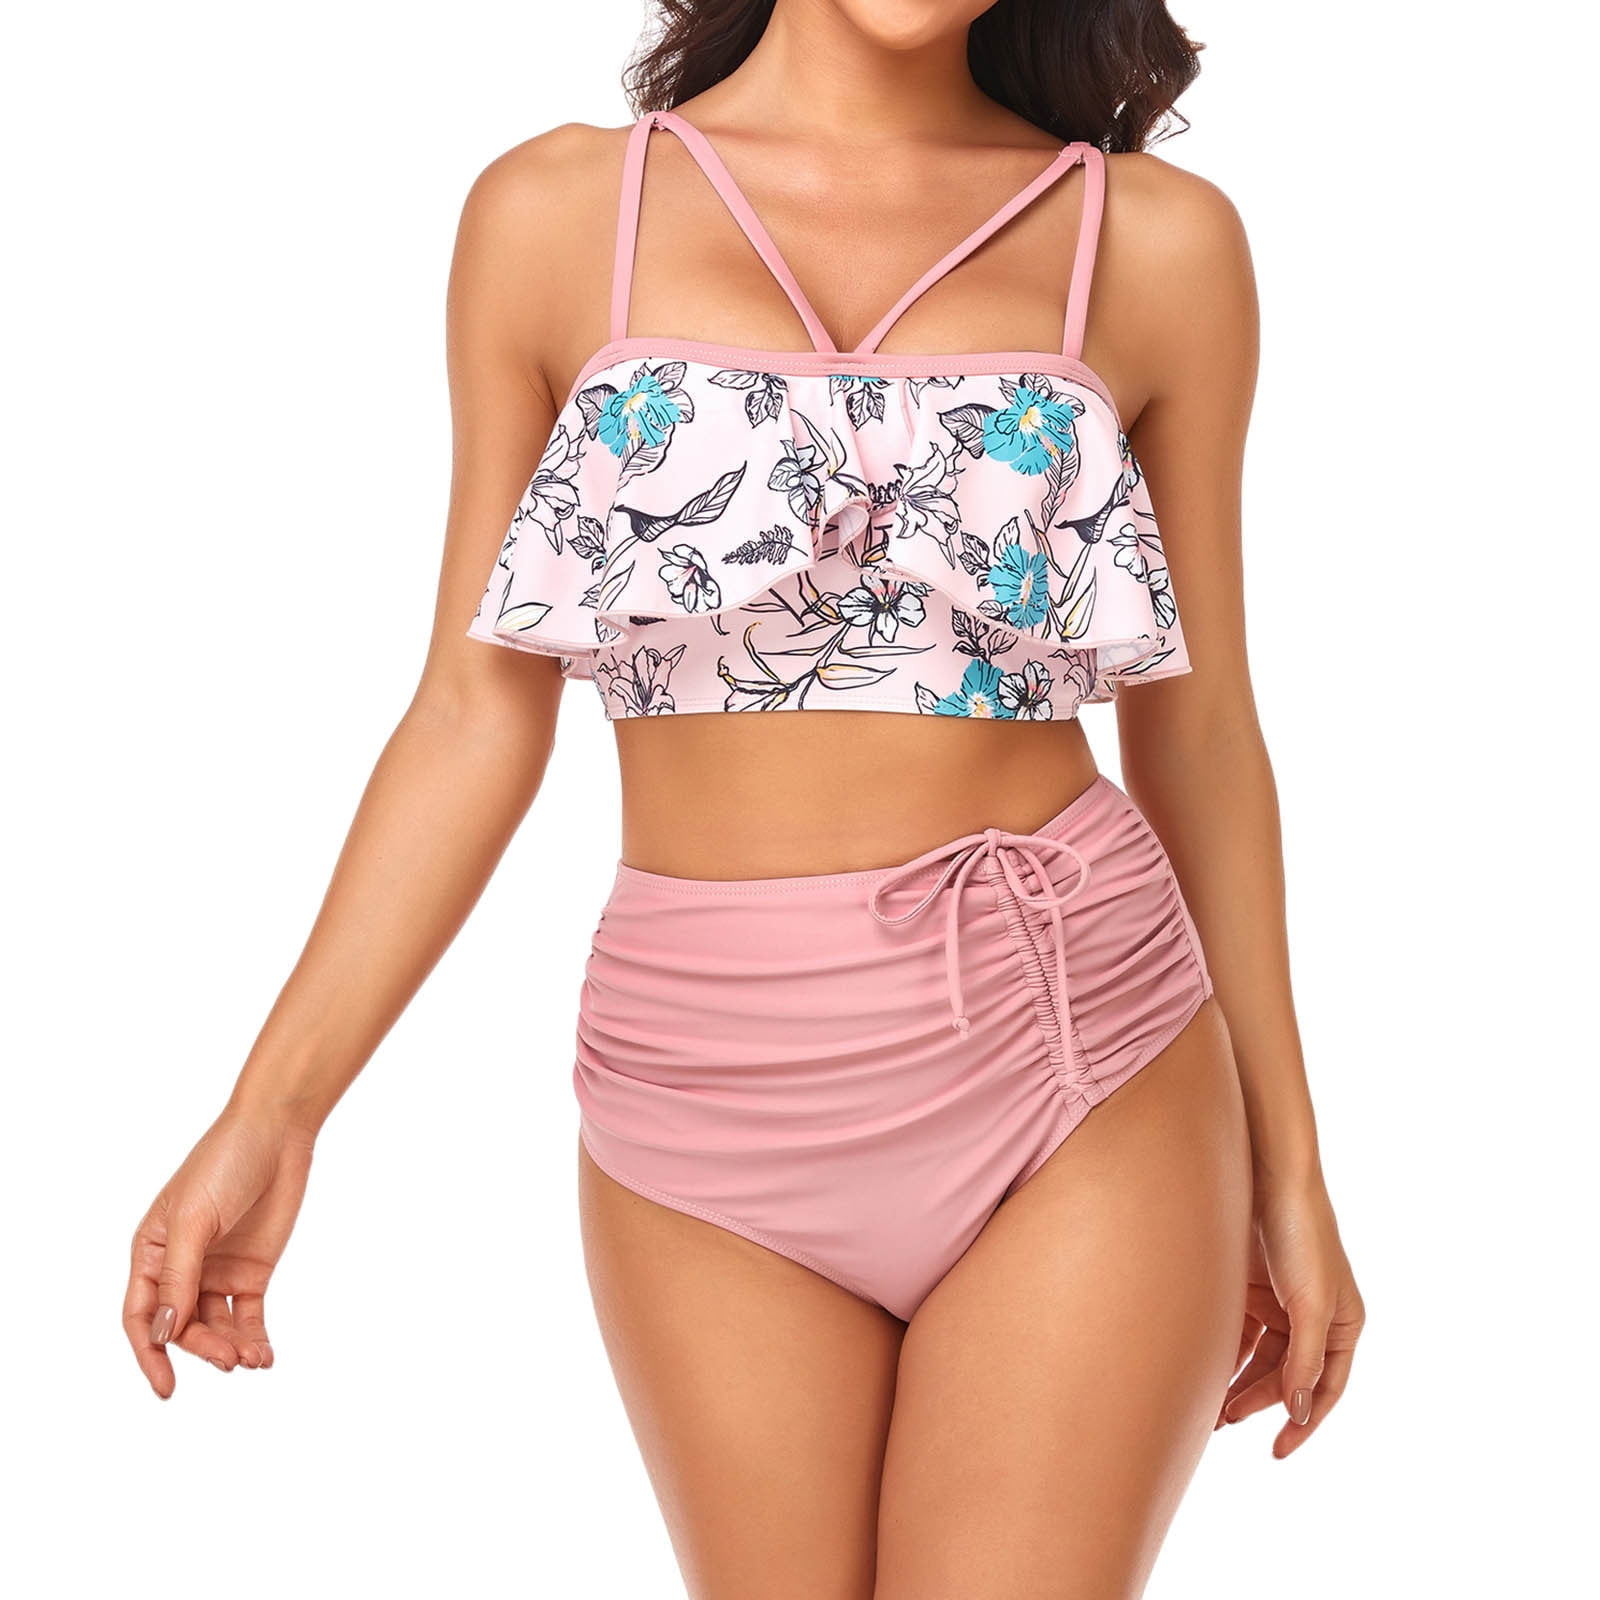 ZQGJB Ruffle Two Piece Swimsuit for Women Summer Cute Floral Print Lace Up  Wrap Padded Swimwear High Waist Bathing Suit Ruched Beachwear Set(Pink,XXL)